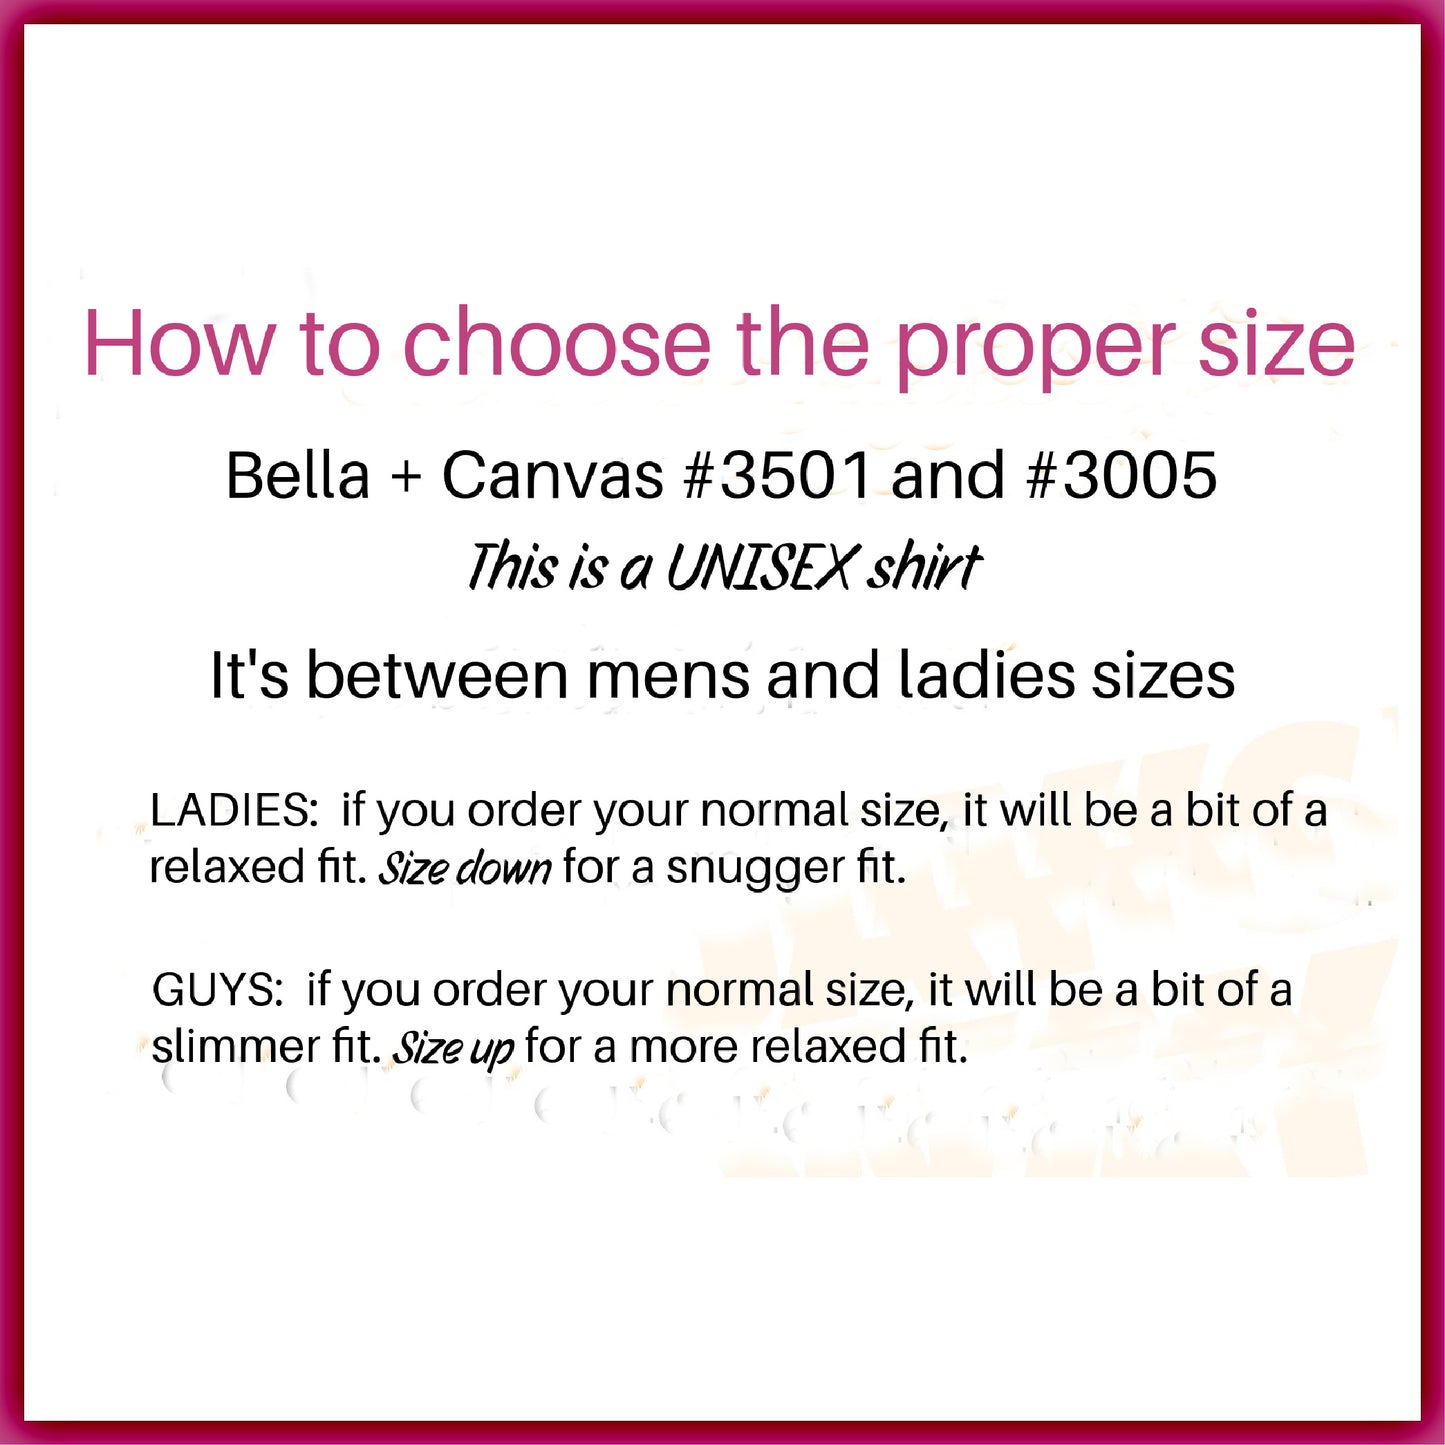 Instructions for how to choose the proper size